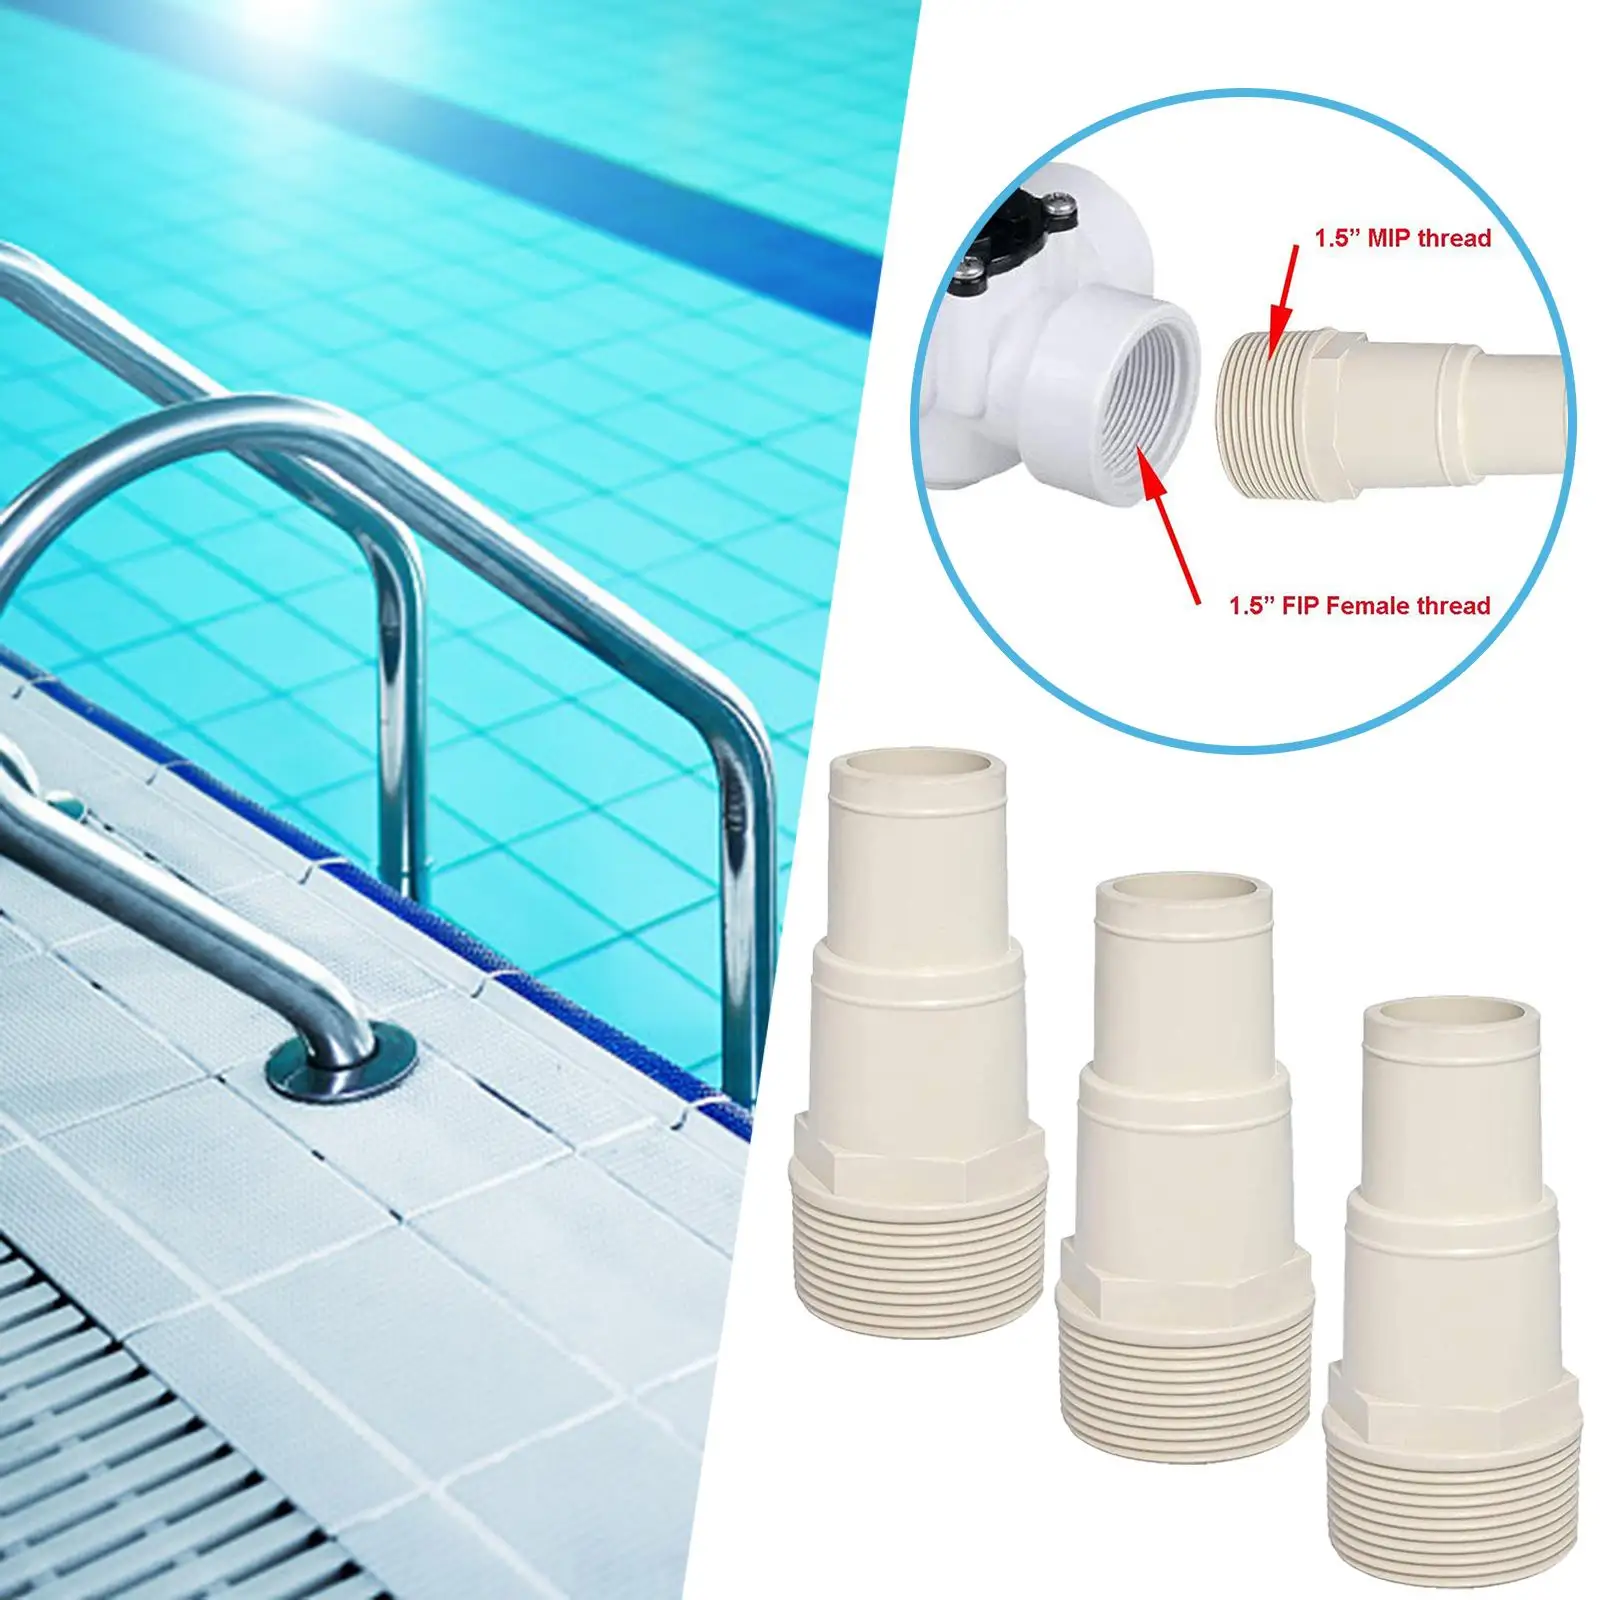 3Pcs Pool Filter Pump Hose Adapter Spx1091Z7 Spx1091Z4 1.5 inch and 1.25 inch Hose Adapters for above Ground Pool Pump Skimmer